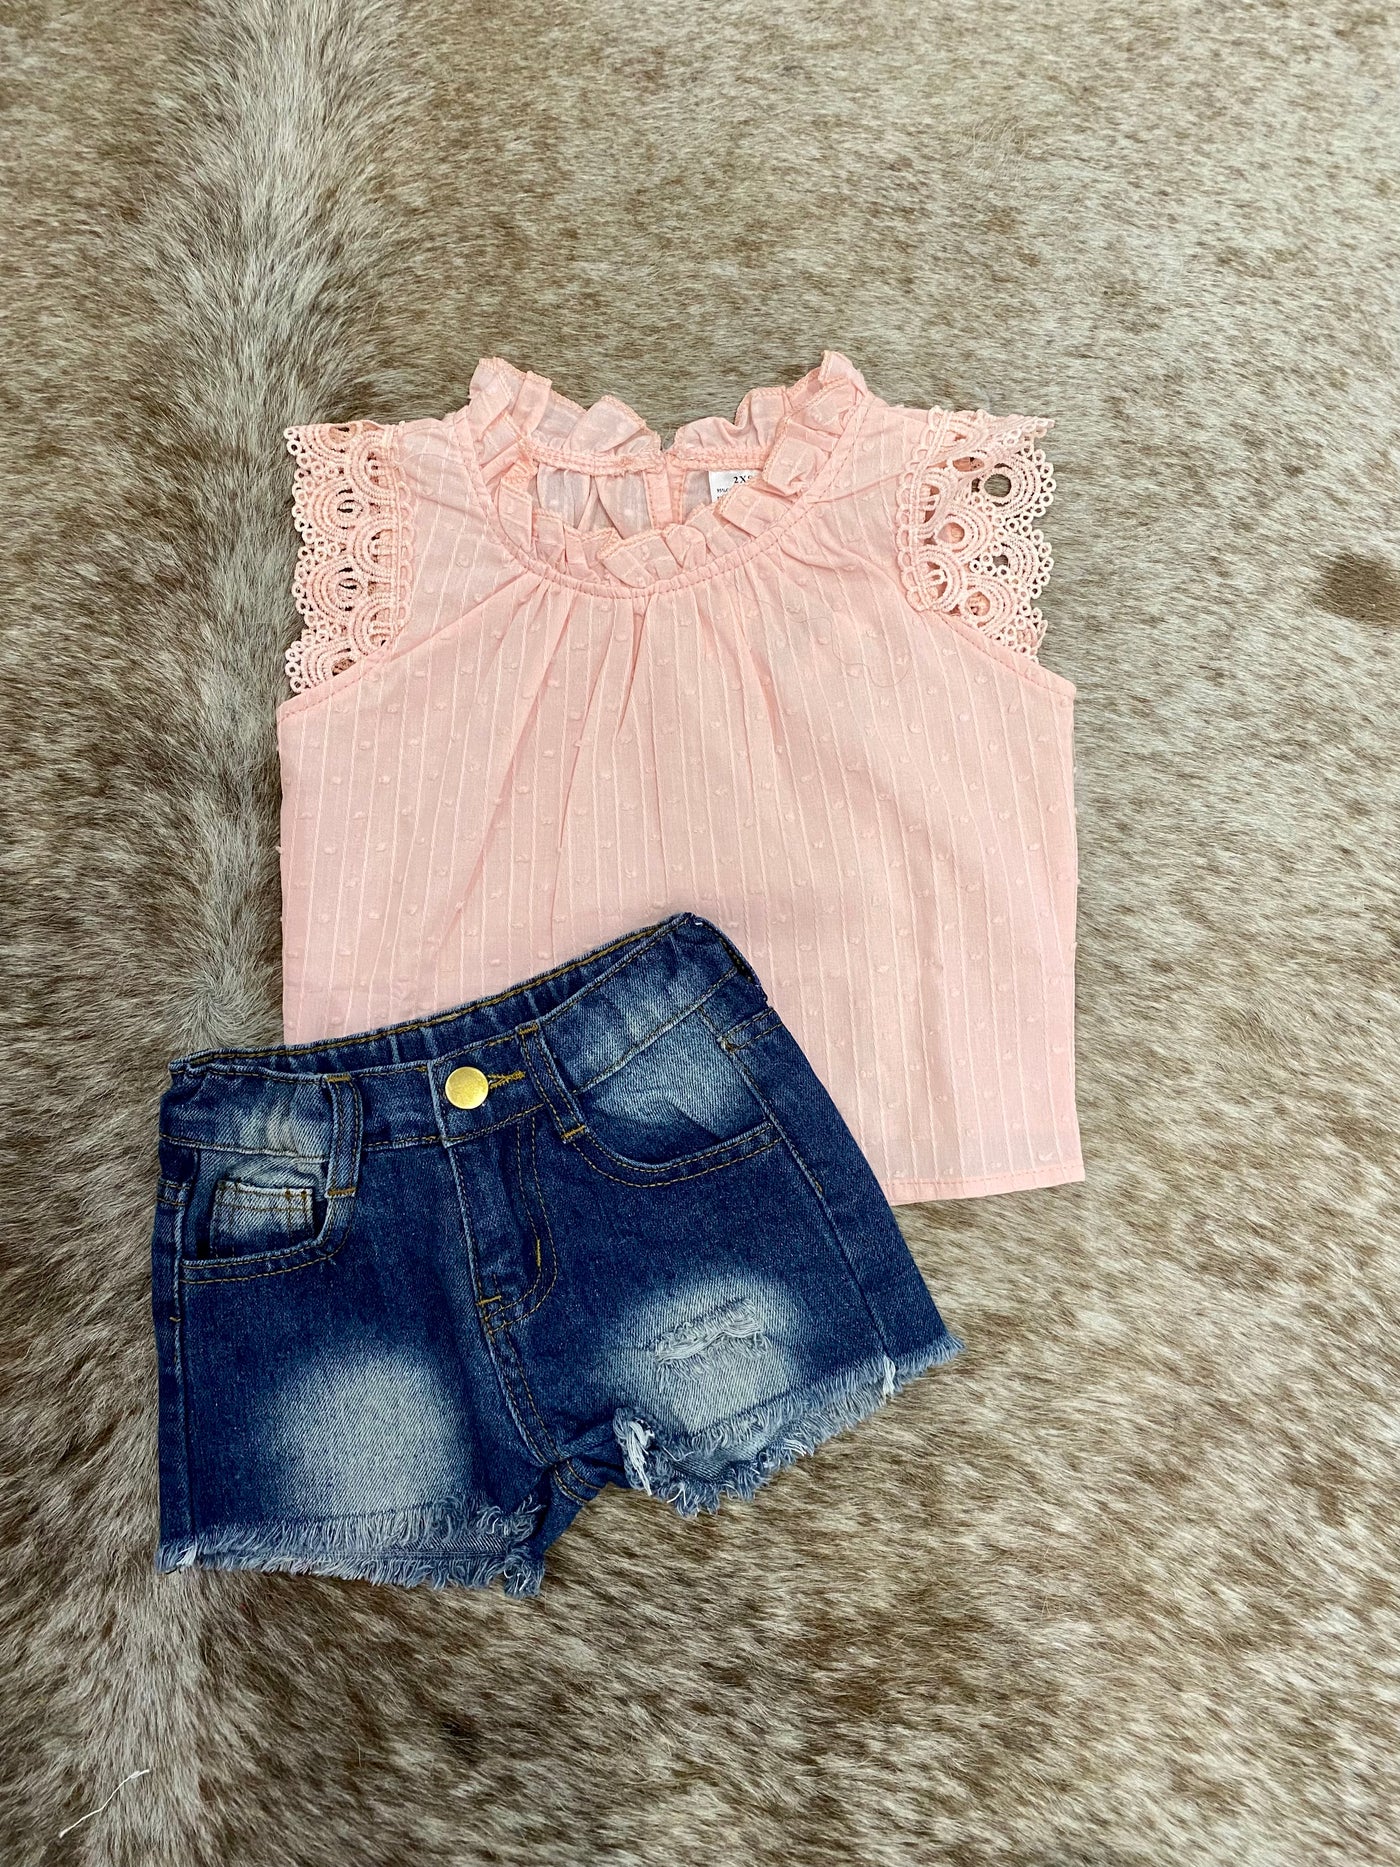 Youth Light Pink Top and Blue Jean Short Set